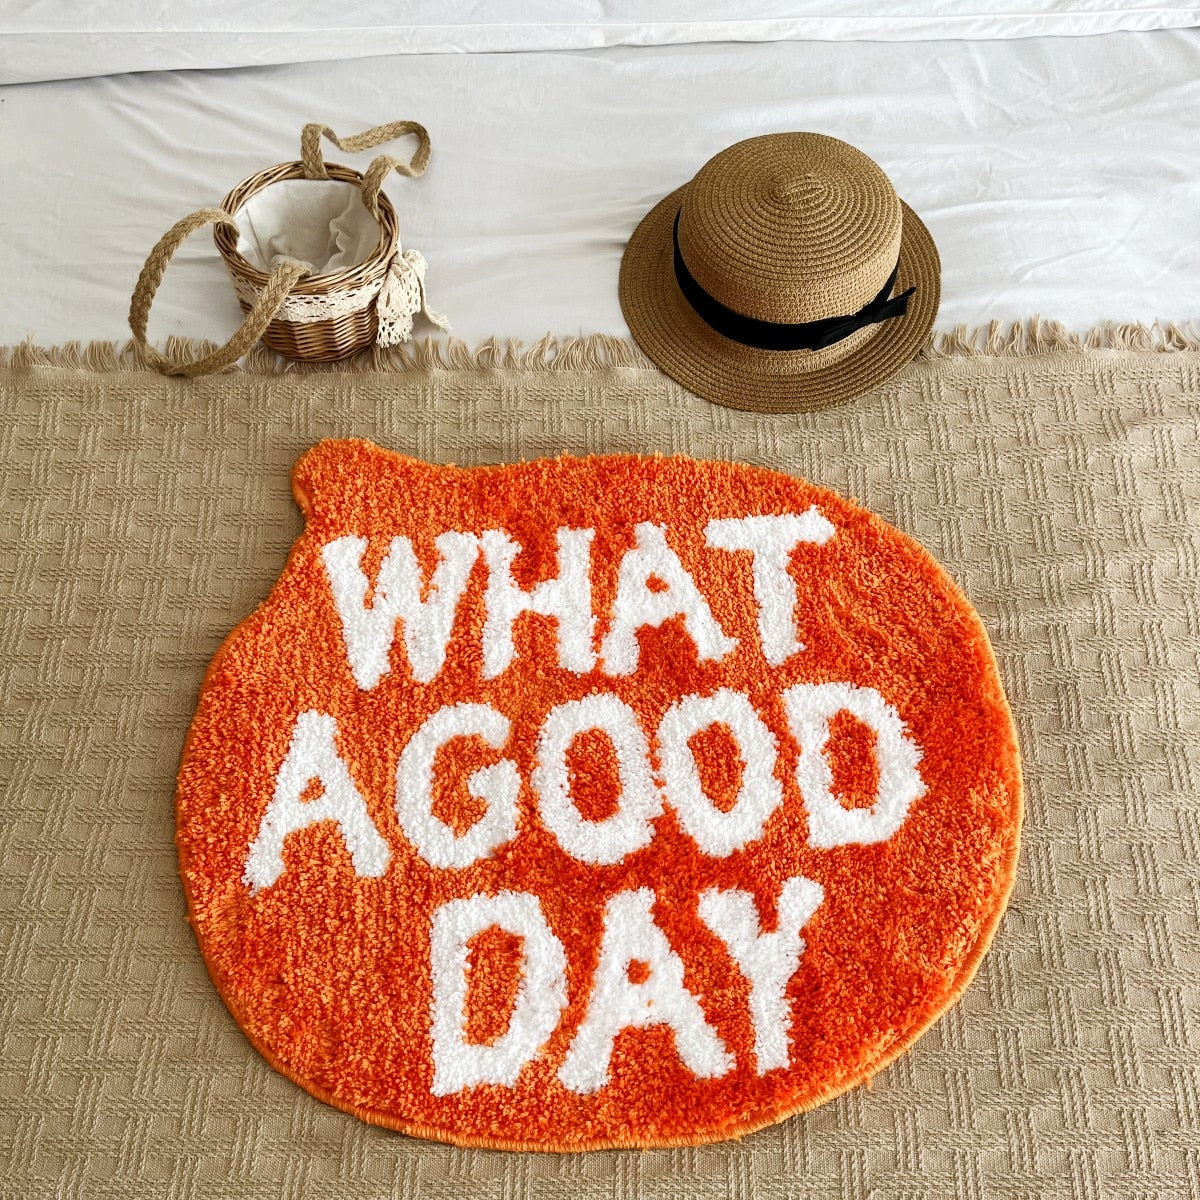 CORX Designs - What A Good Day Rug - Review